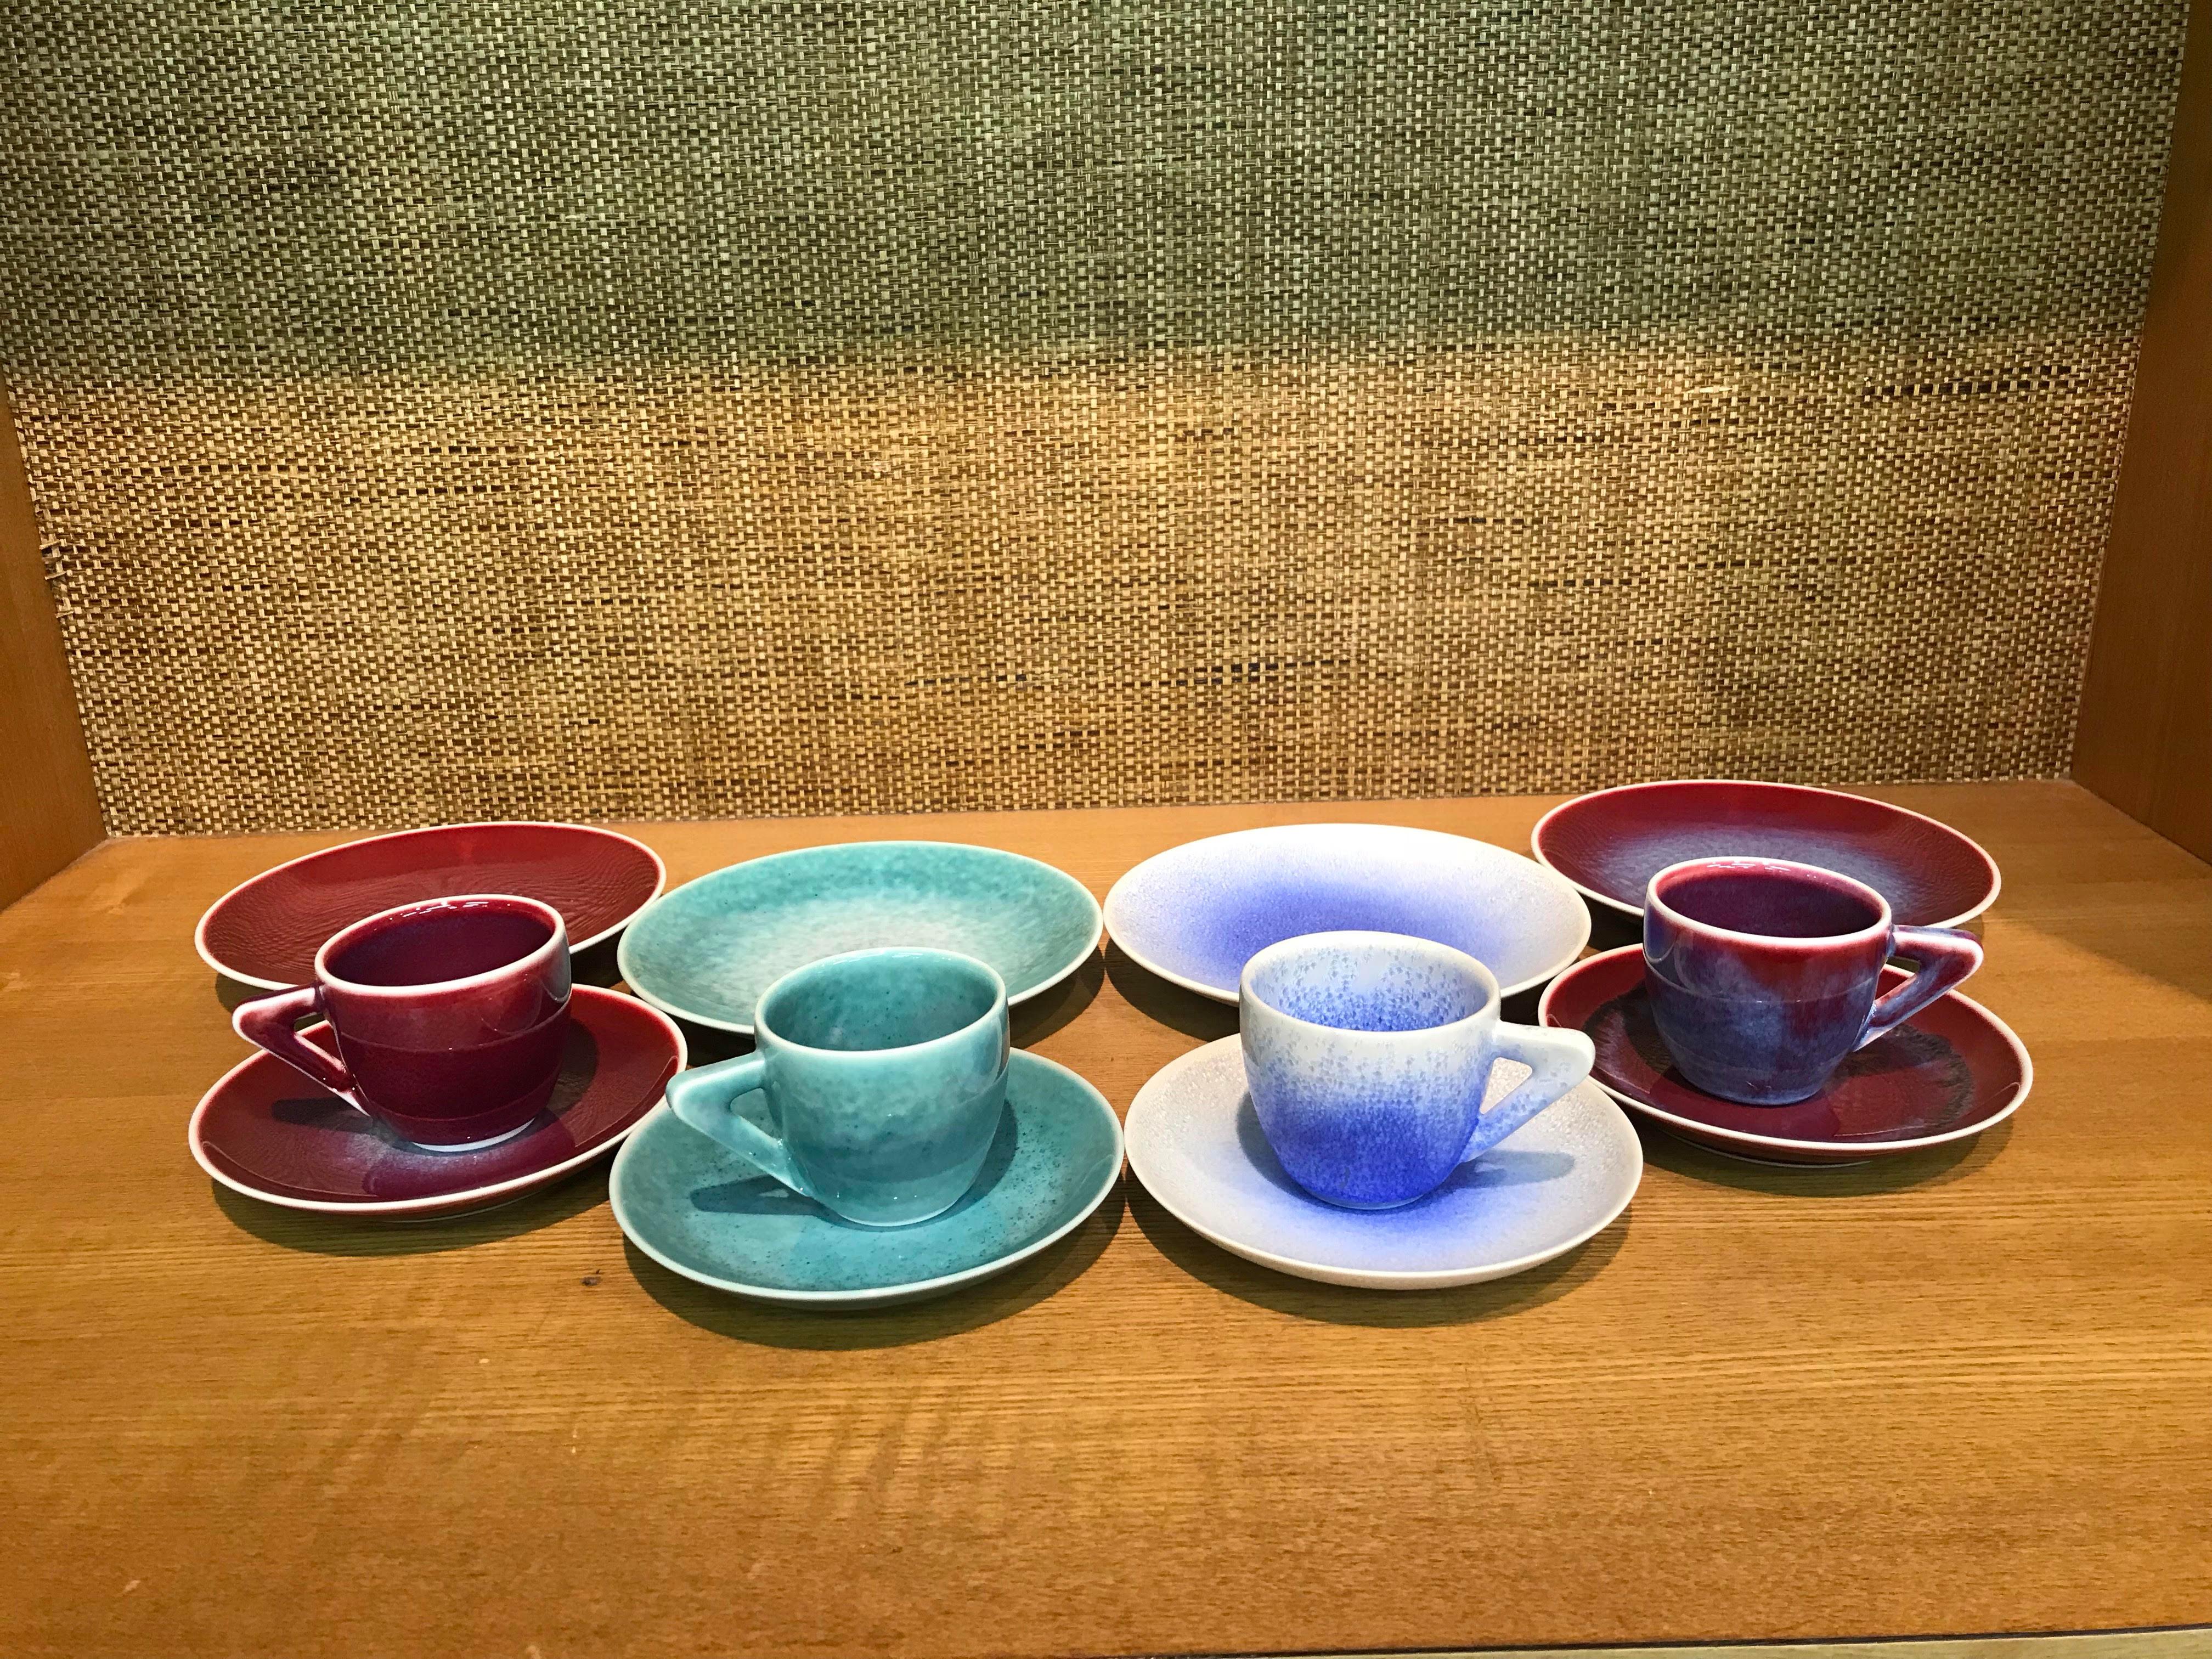 Stunning set of four contemporary Japanese signed hand-glazed porcelain demitasse cups and saucers and four matching dessert plates, in a beautiful shape masterfully hand-glazed in the artist's stunning signature colors like wine-red, green and